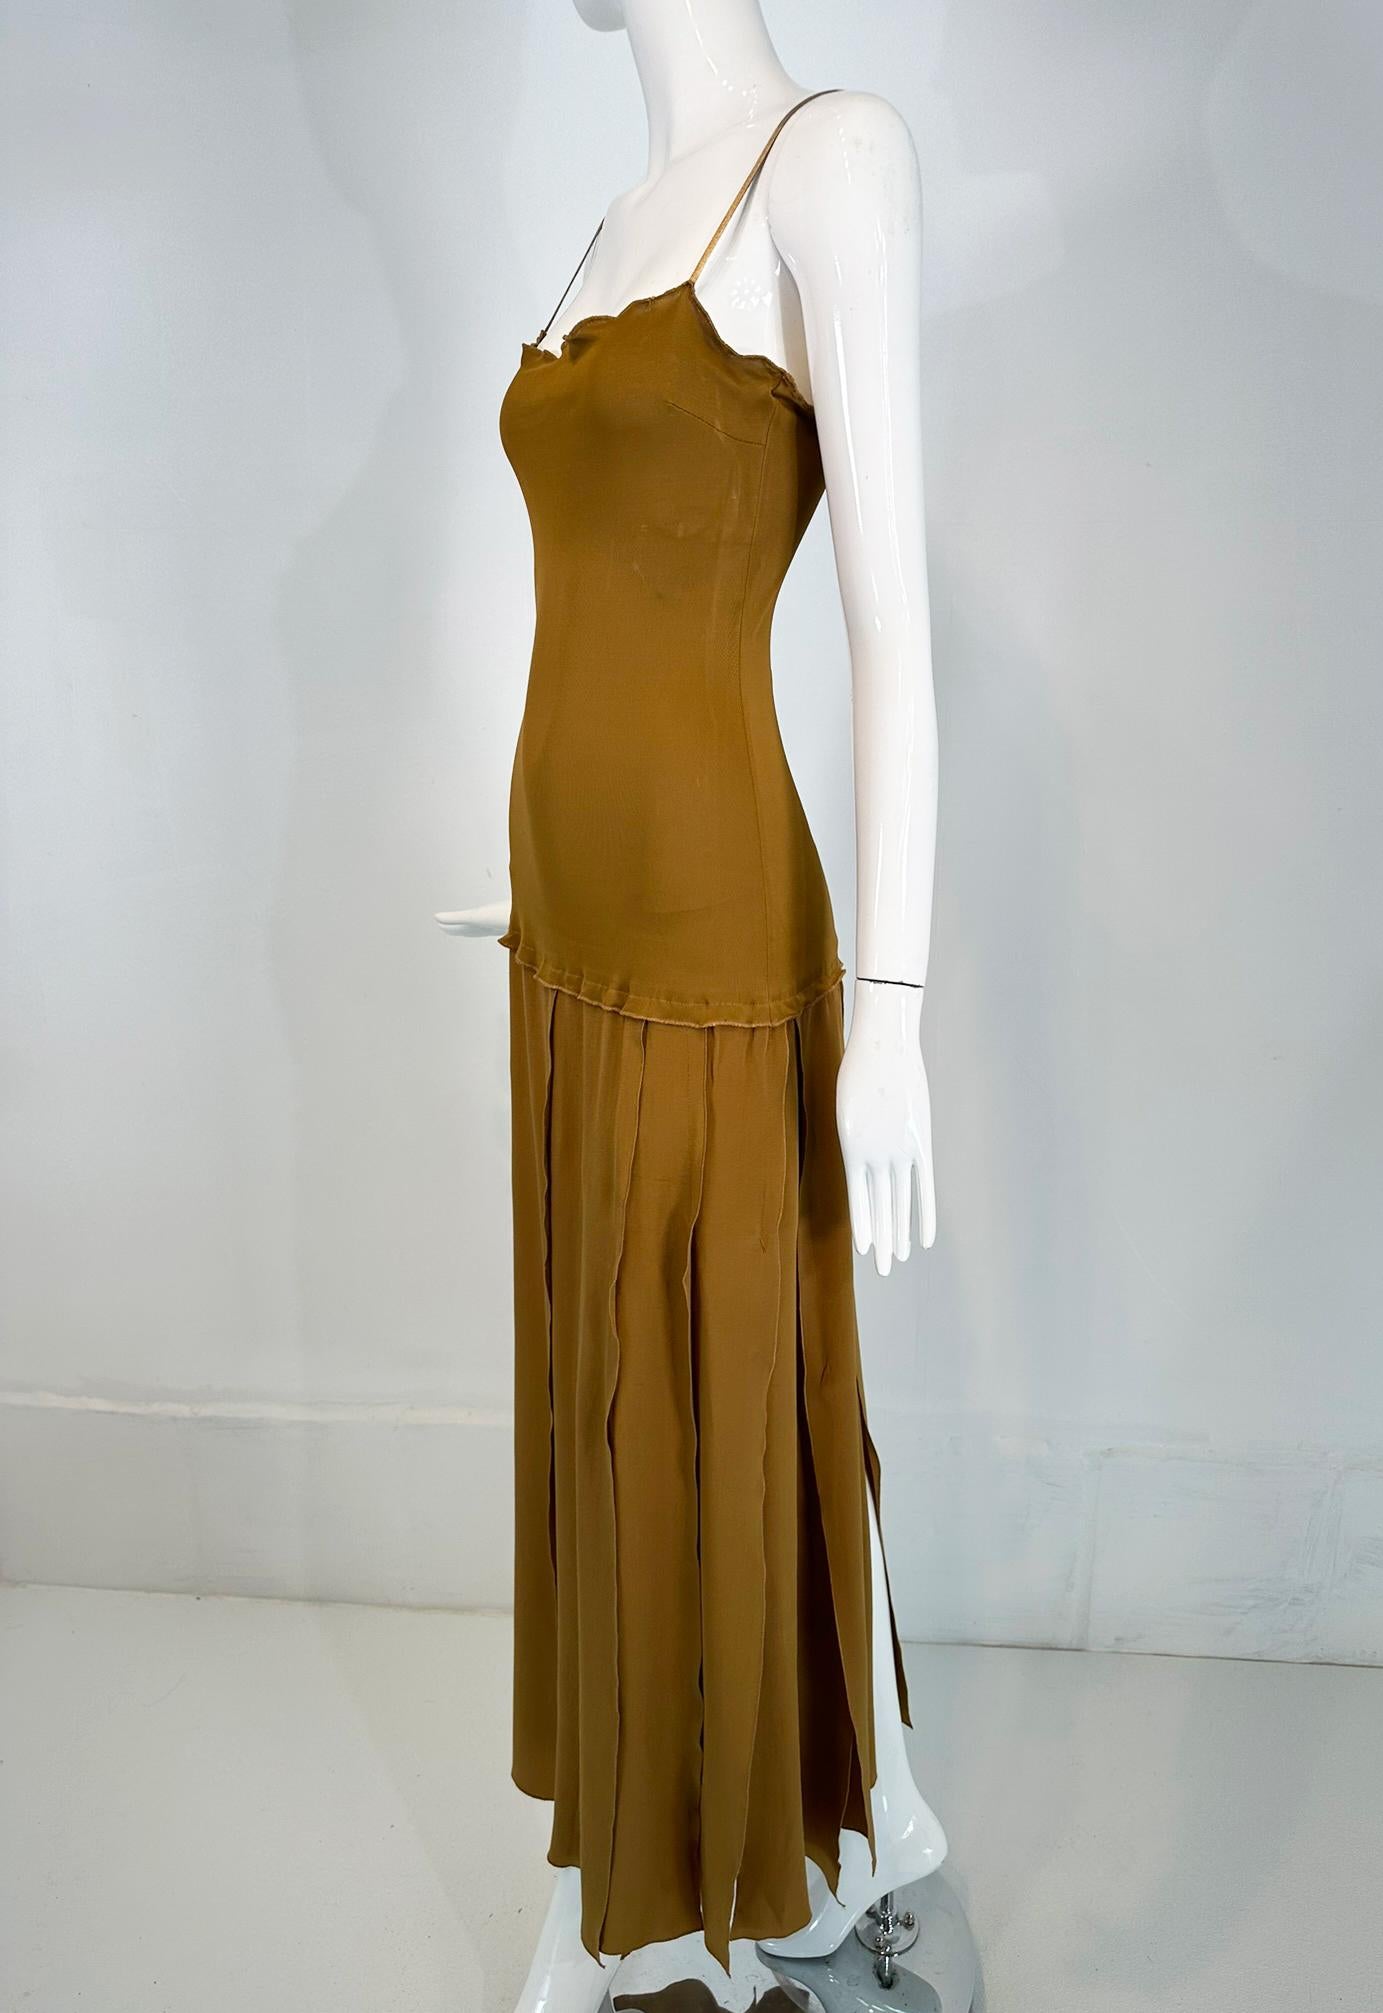 1990s Genny Gold Jersey Gold Silk Chiffon Car Wash Skirt Evening Dress In Good Condition For Sale In West Palm Beach, FL